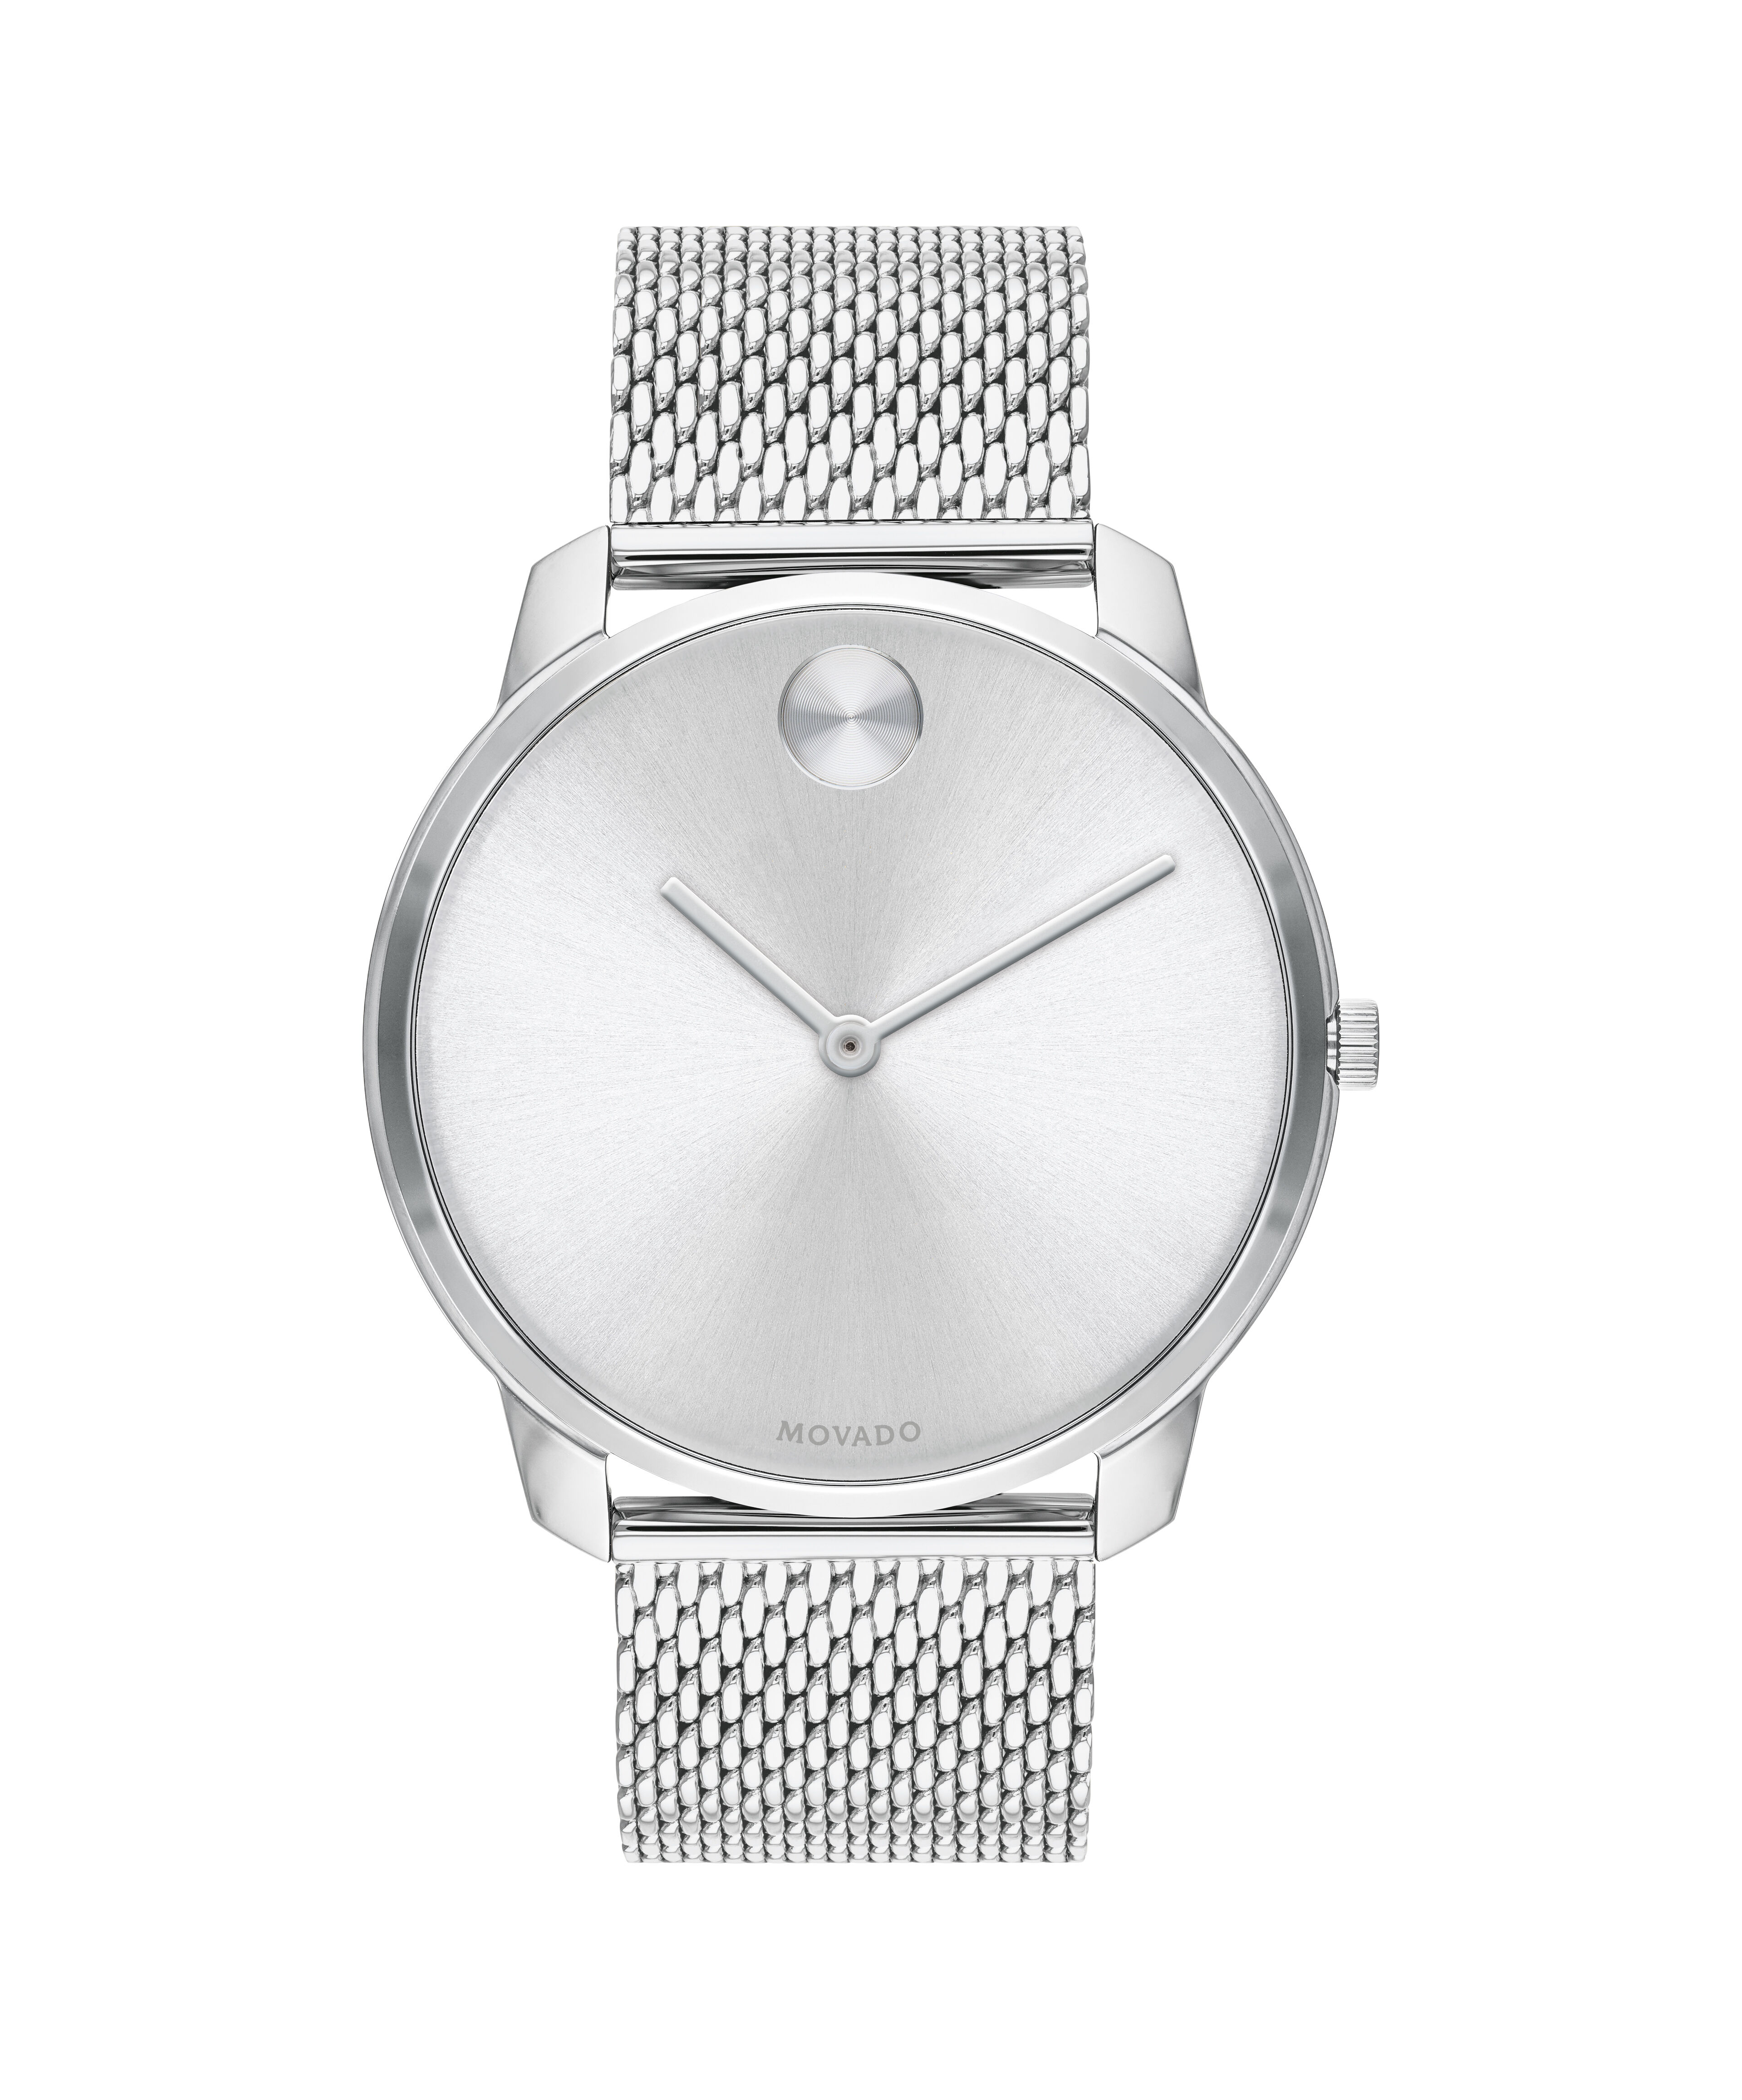 Movado Wristwatch Classic Steel White Dial 35mm / ref. 84-35-865